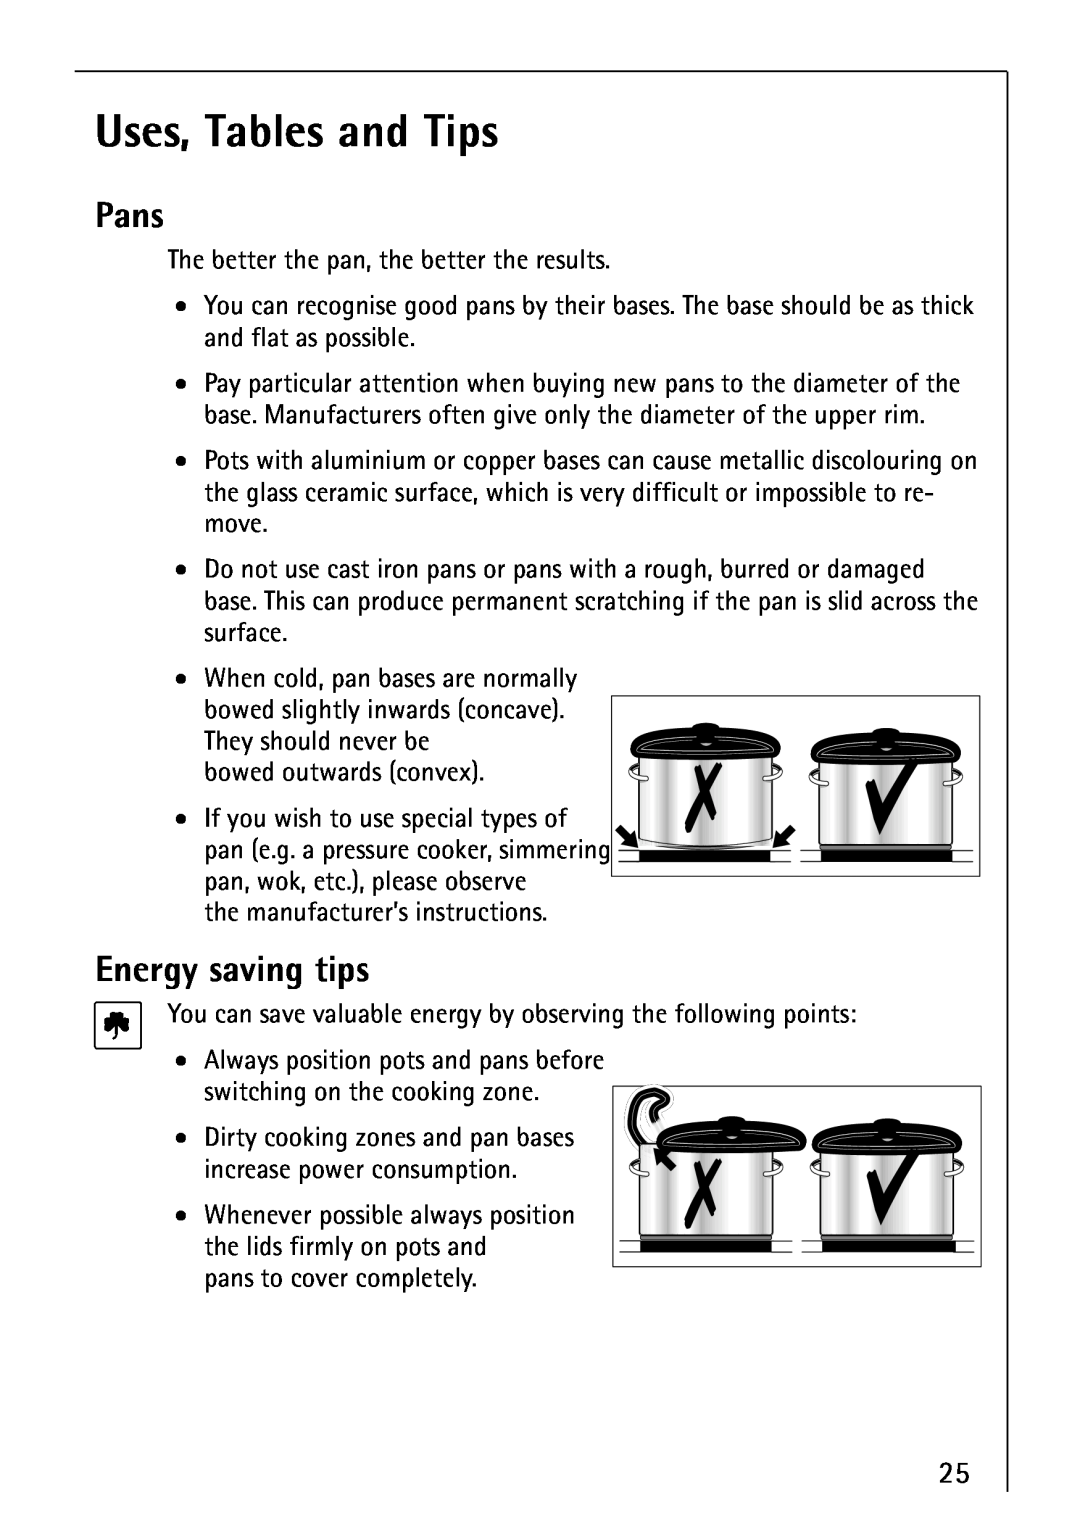 Electrolux 66300KF-an installation instructions Uses, Tables and Tips, Pans, Energy saving tips 